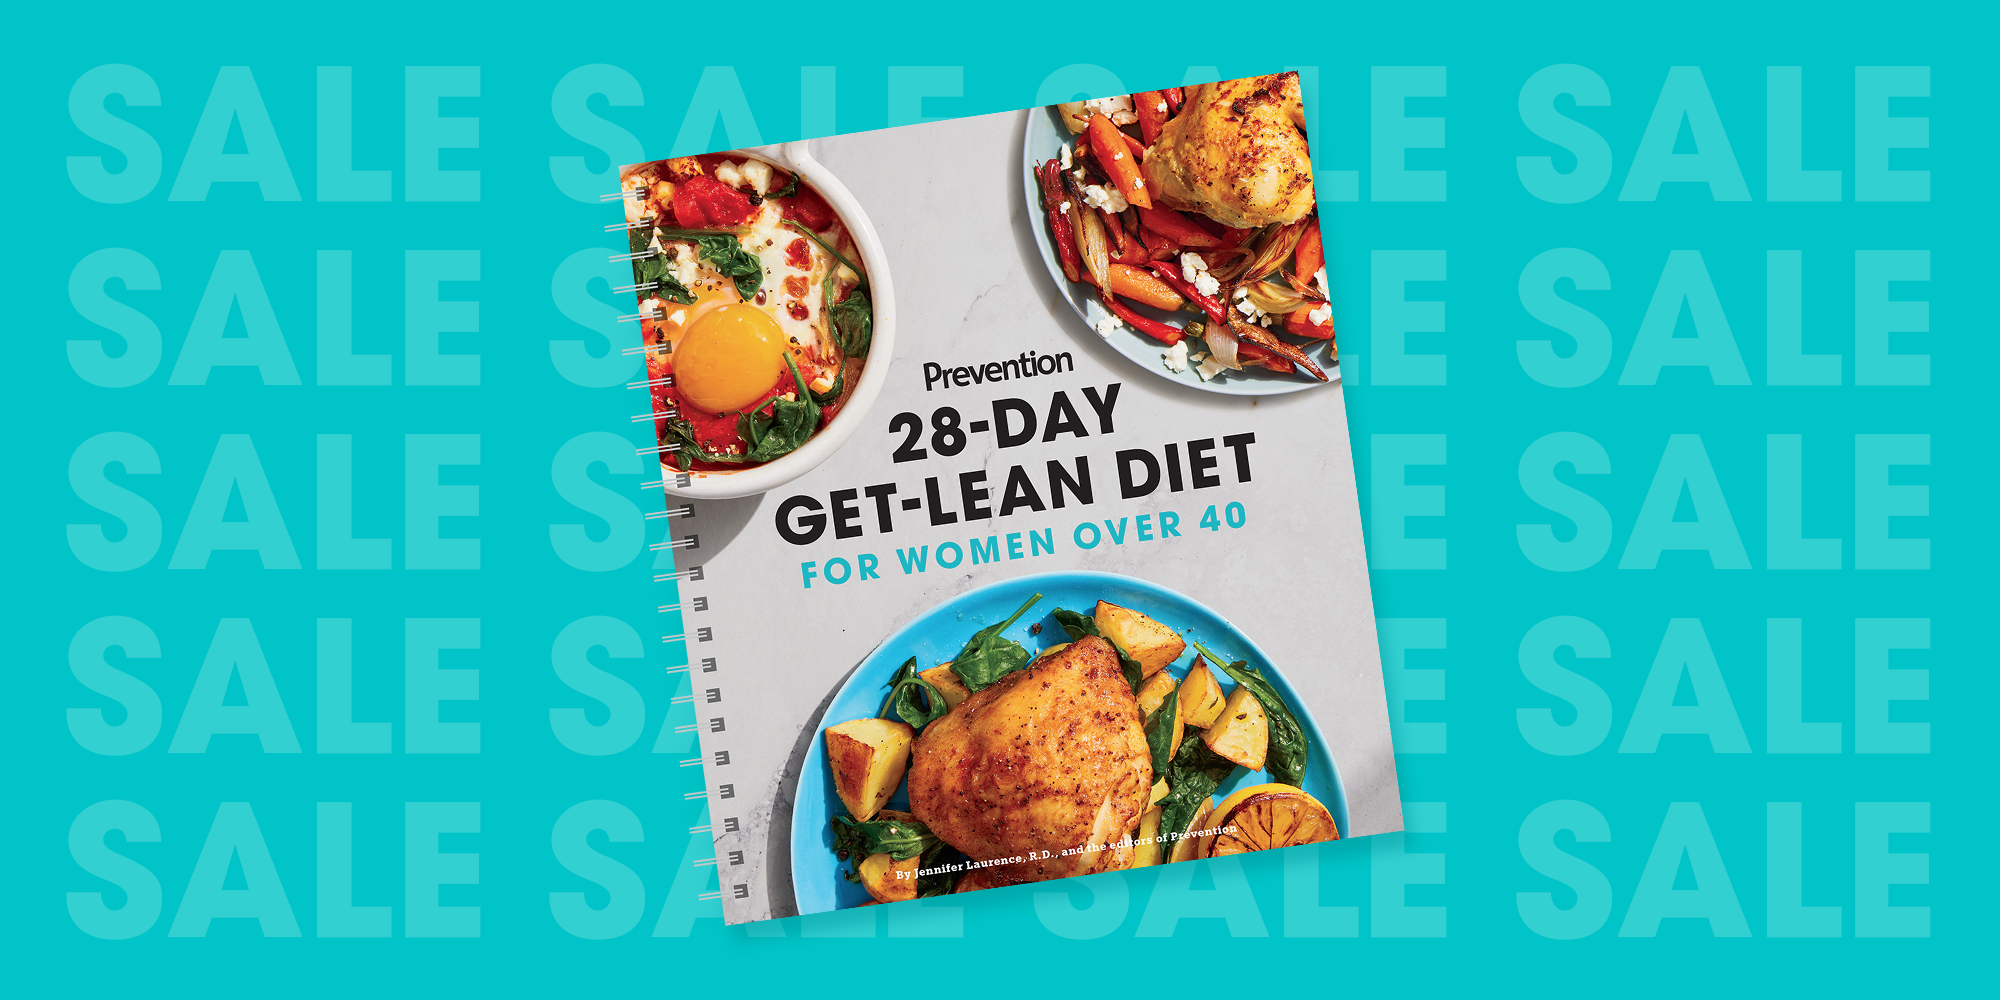 28-Day Get-Lean Diet for Women Over 40